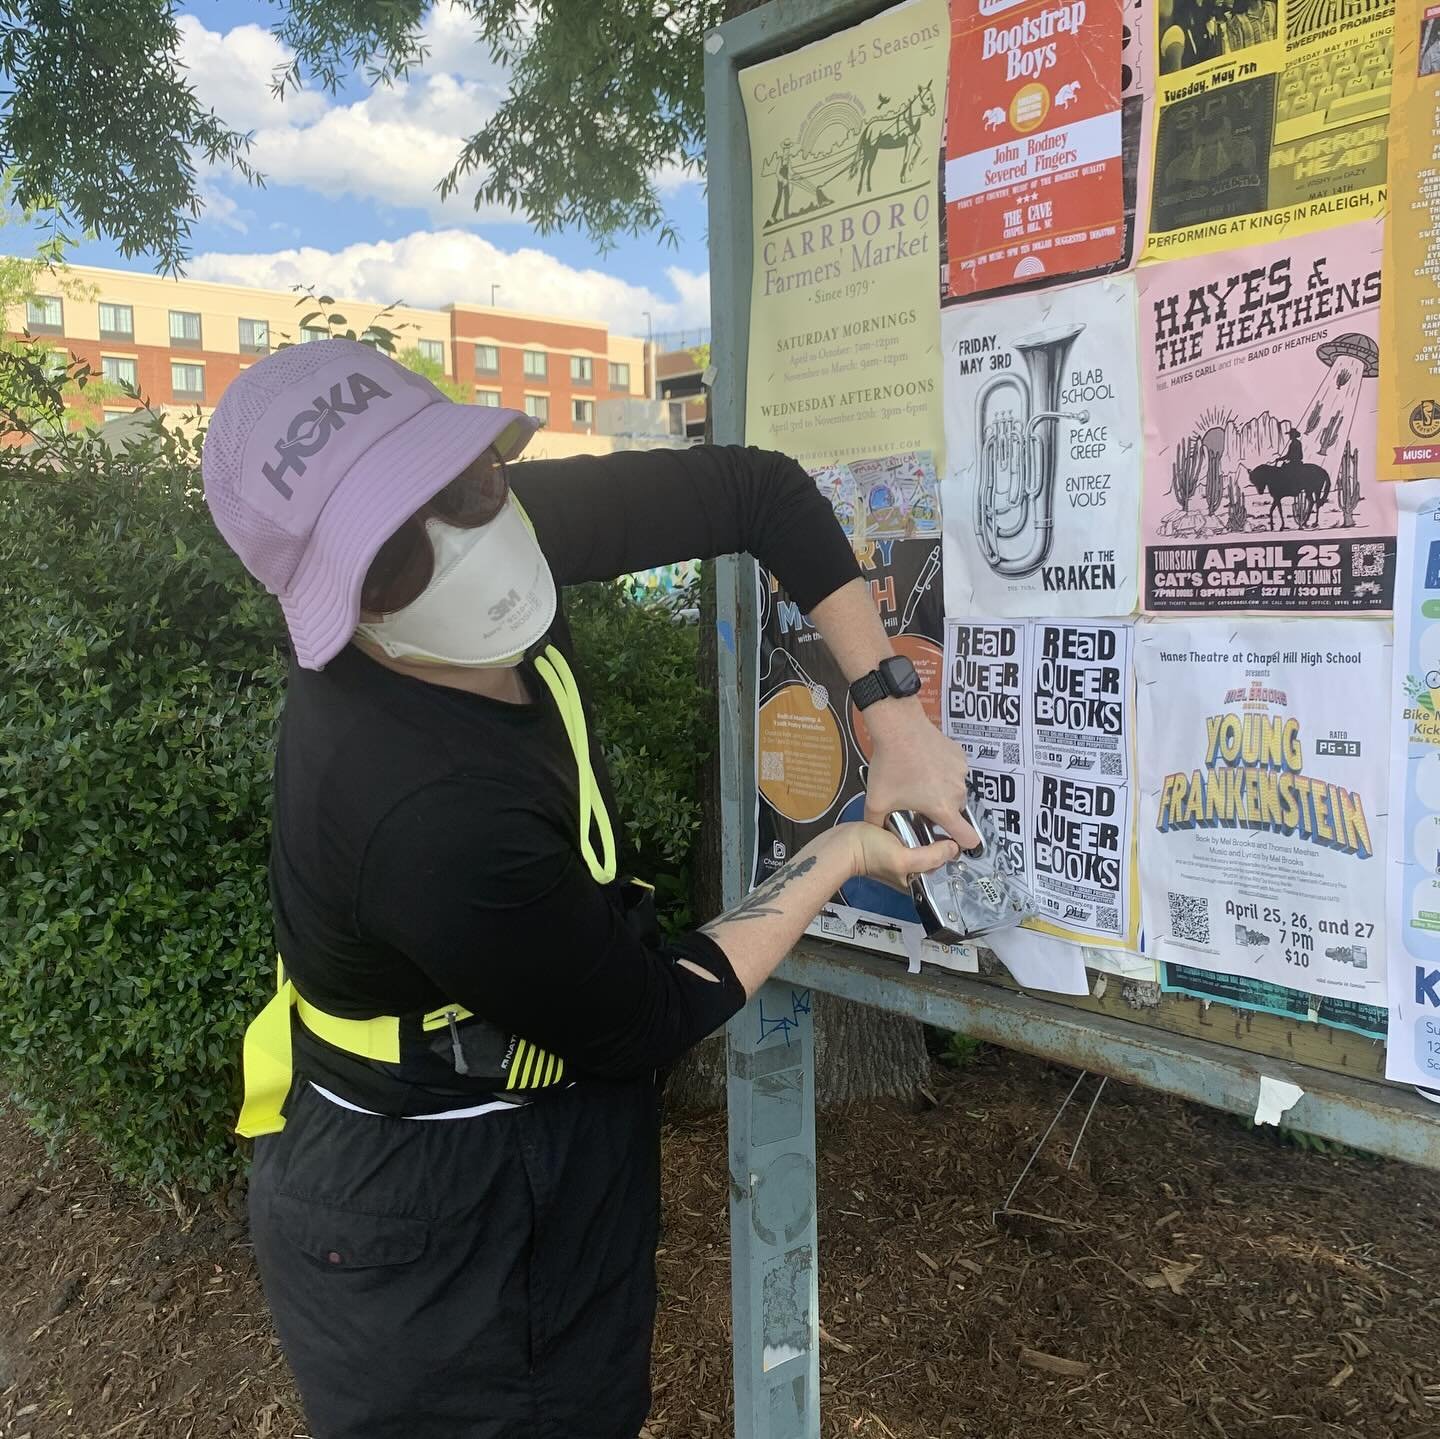 our web designer @uxmaxburns out in their community spreading the word about QLL!

printable pdf flyers available at 🔗 https://tinyurl.com/QLL-flyers

have you dropped QLL flyers at your local haunts? snap a pic and tag us! &lt;3